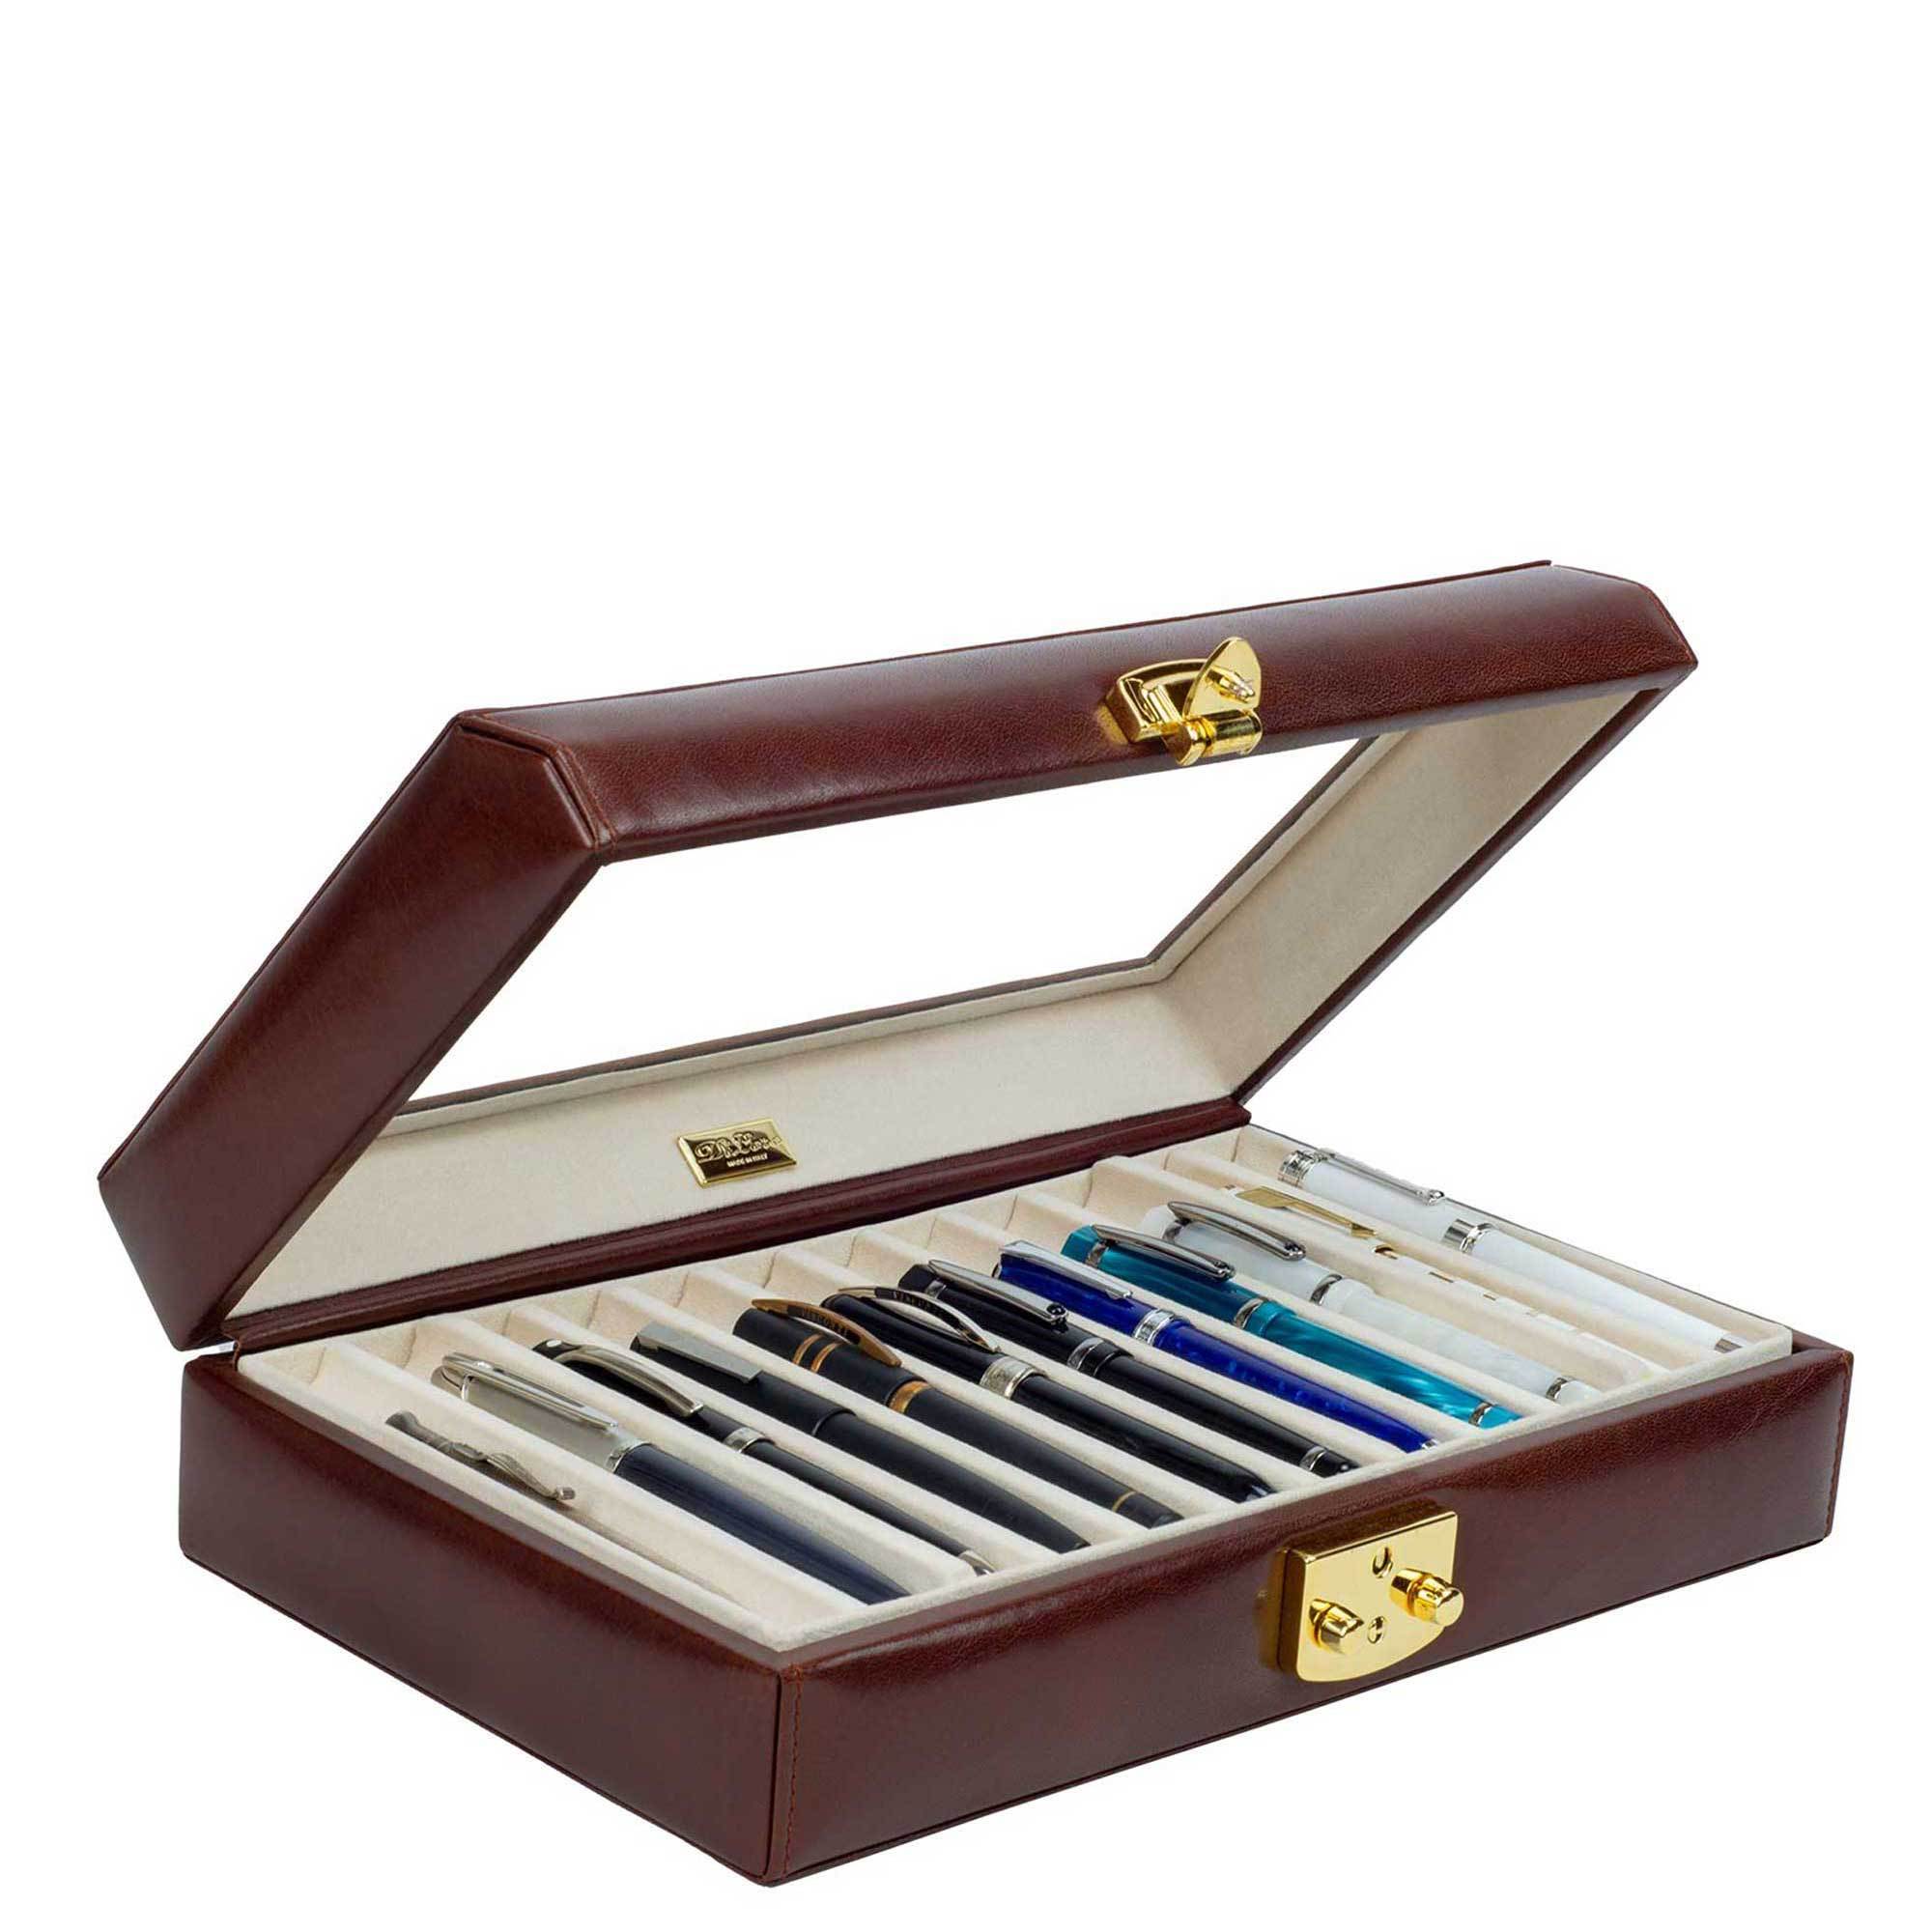 Shop for Leather Pen & Pencil Holders & Cases by DiLoro - Designed in Switzerland - Swiss Design